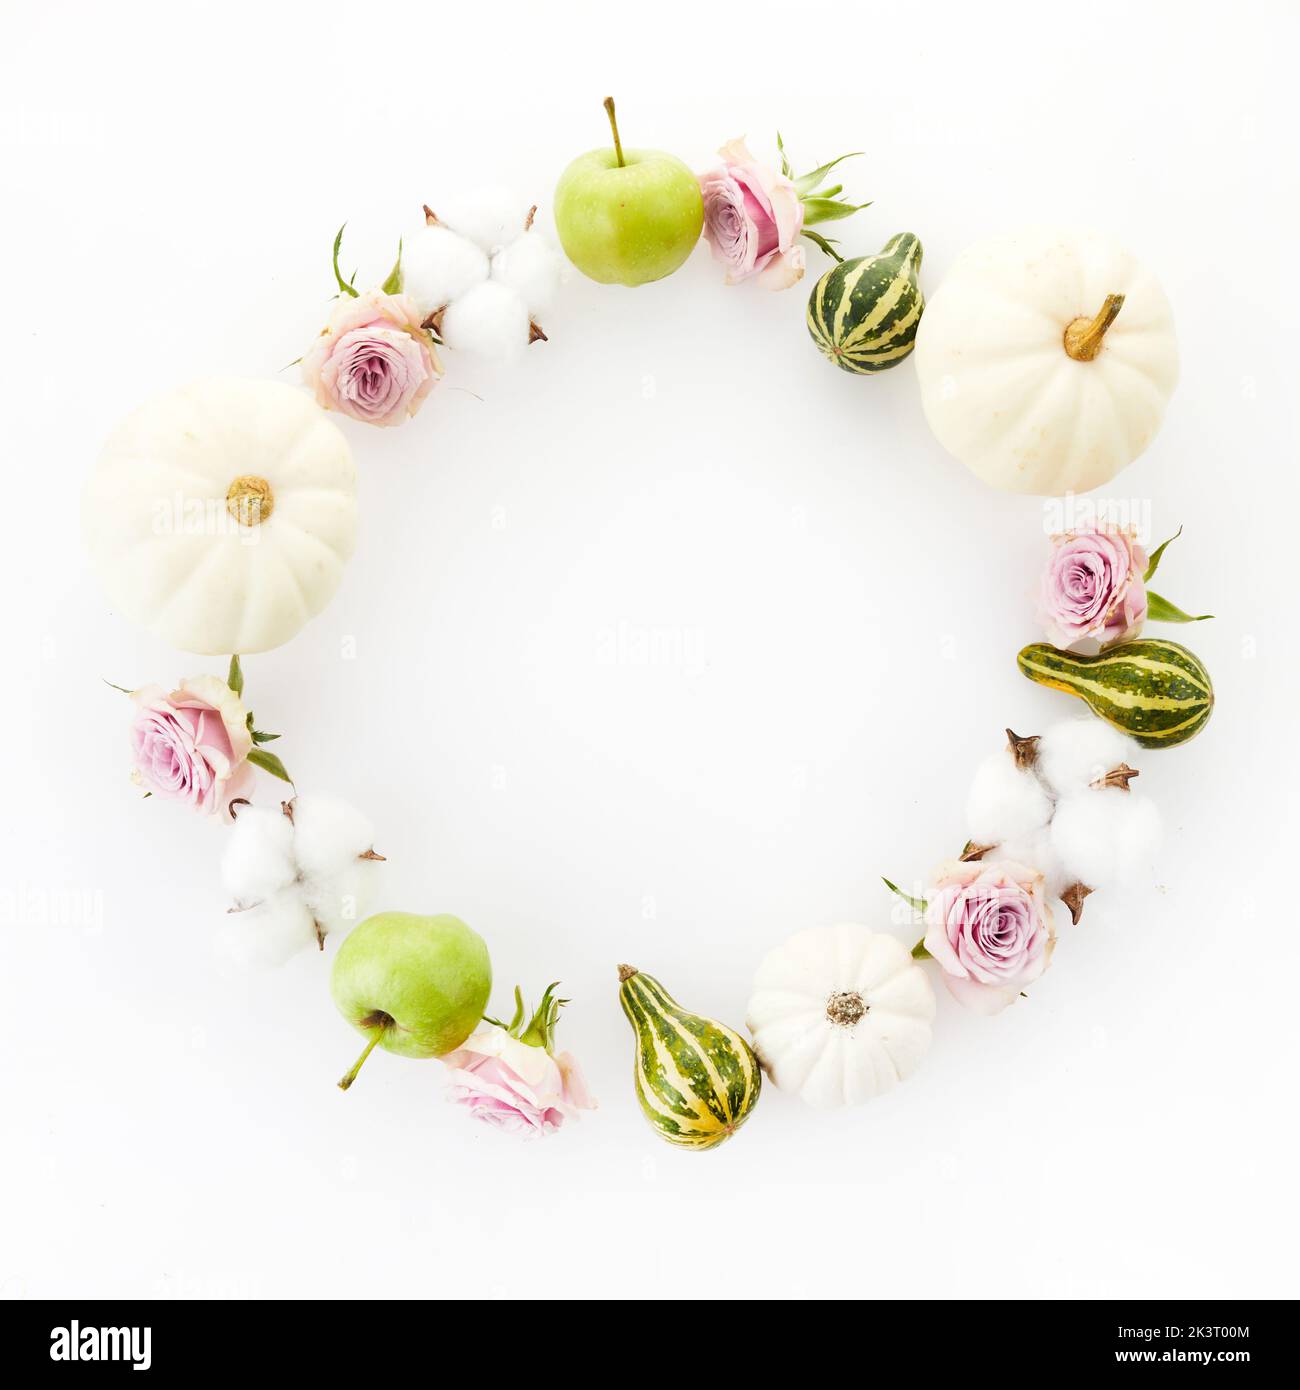 Autumn frame. Pumpkins, flowers, apples on white background. Autumn, fall, thanksgiving day concept. Flat lay. Stock Photo